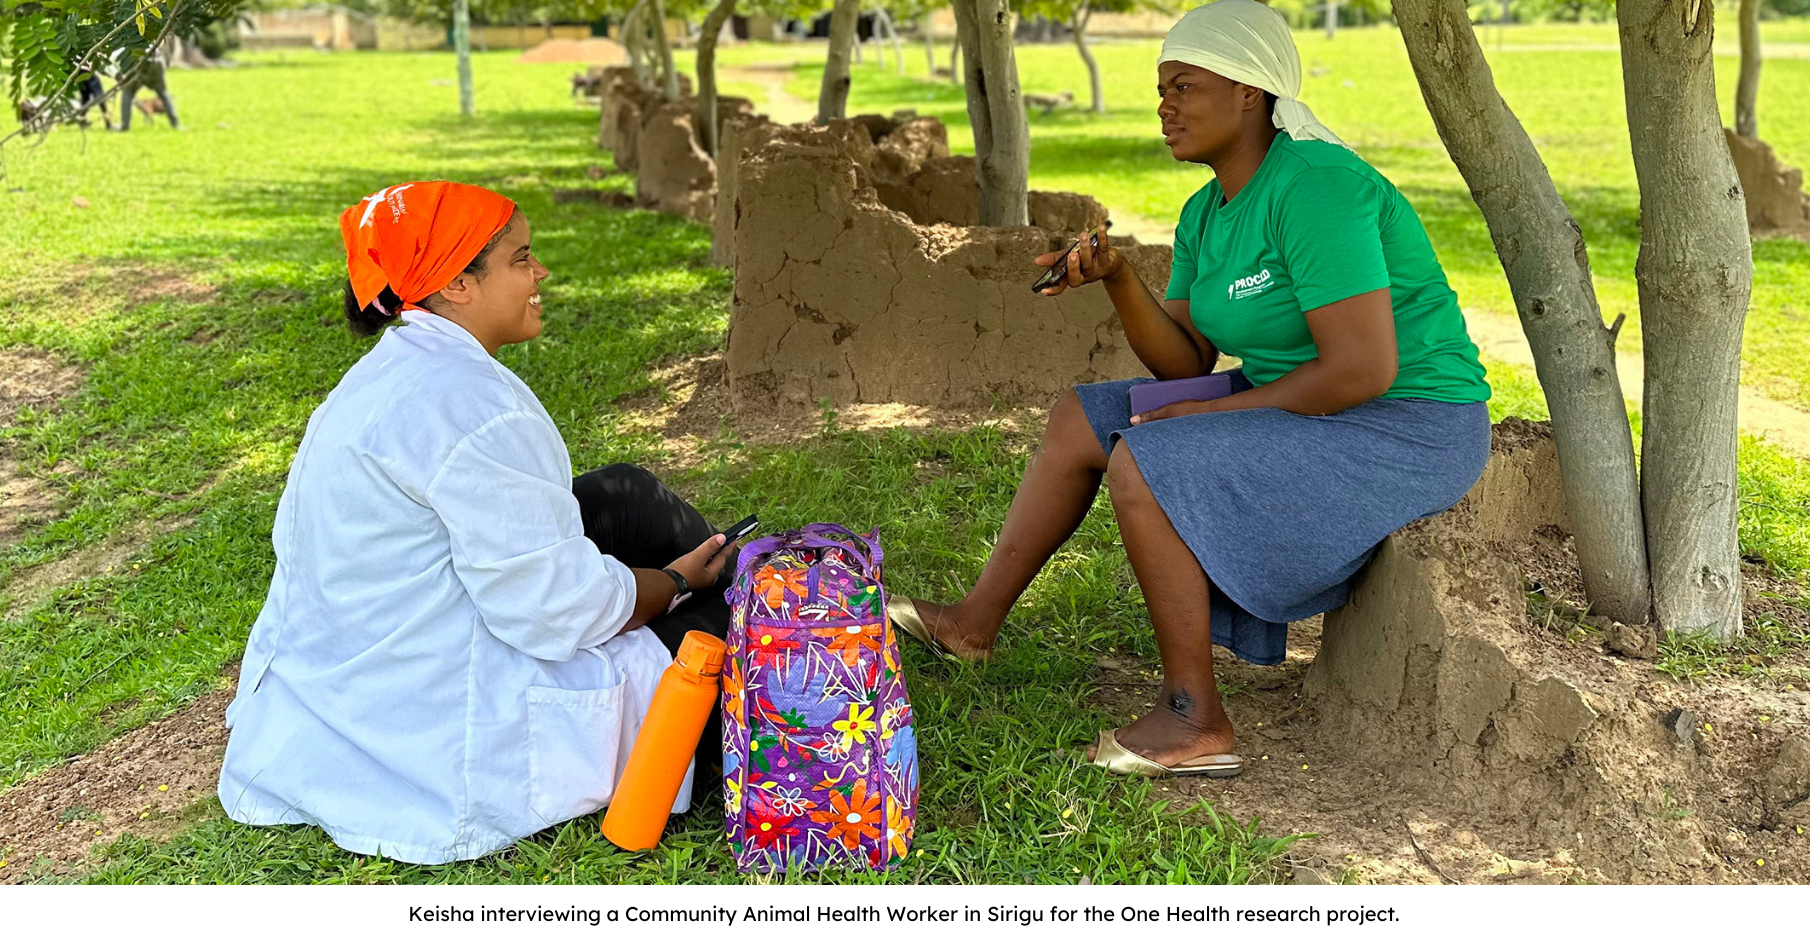 Keisha interviewing a Community Animal Health Worker in Sirigu for the One Health research project